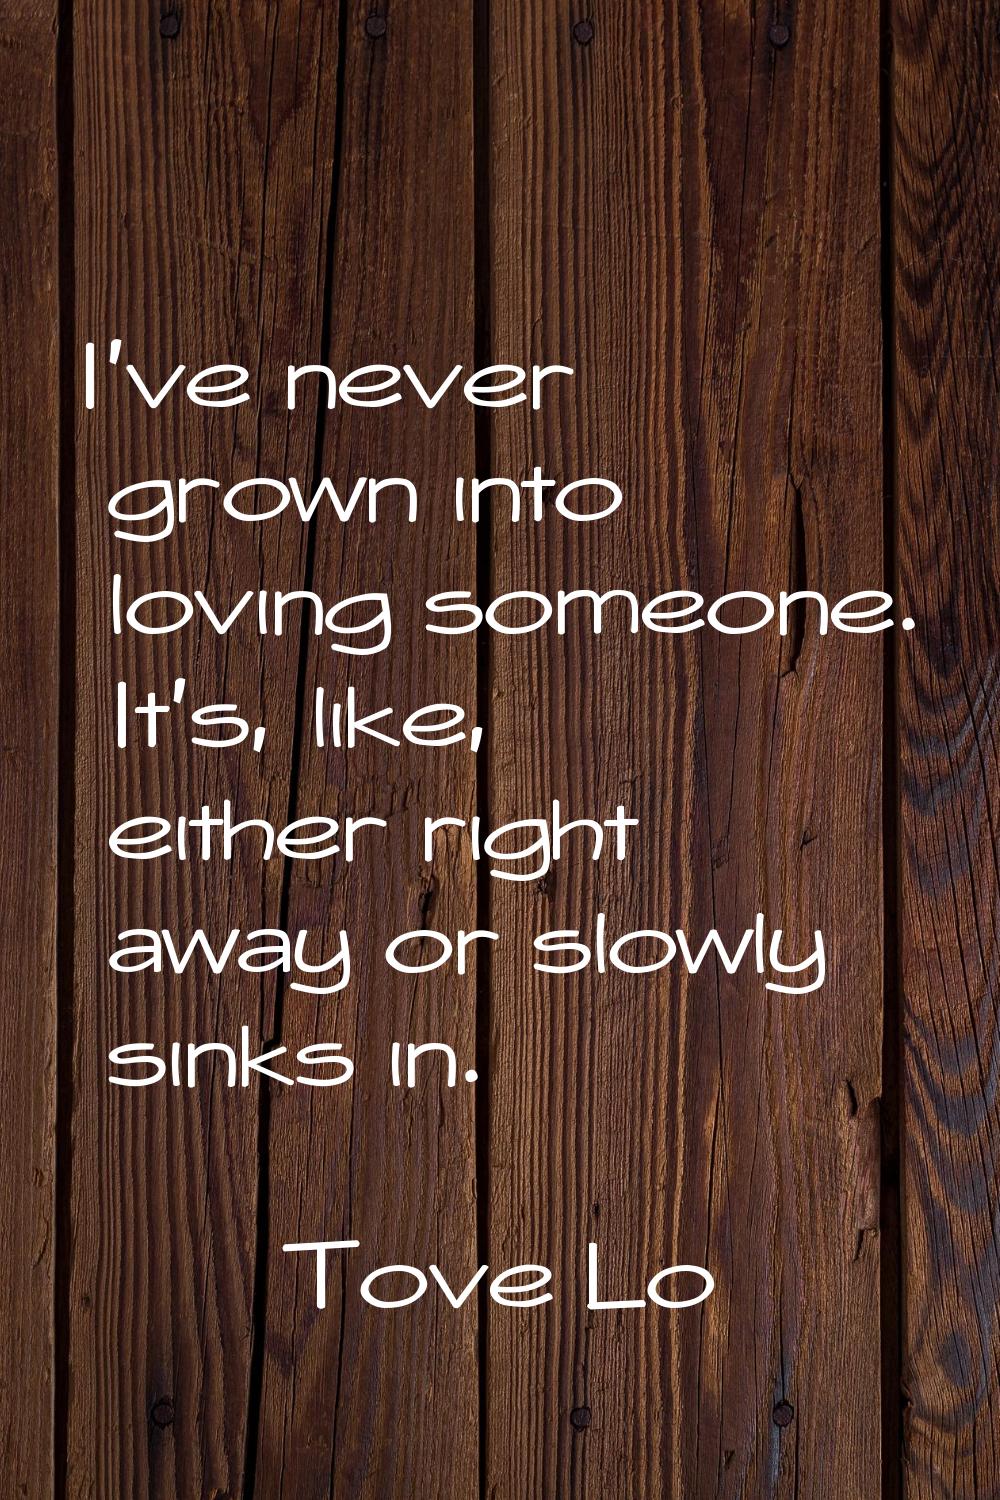 I've never grown into loving someone. It's, like, either right away or slowly sinks in.